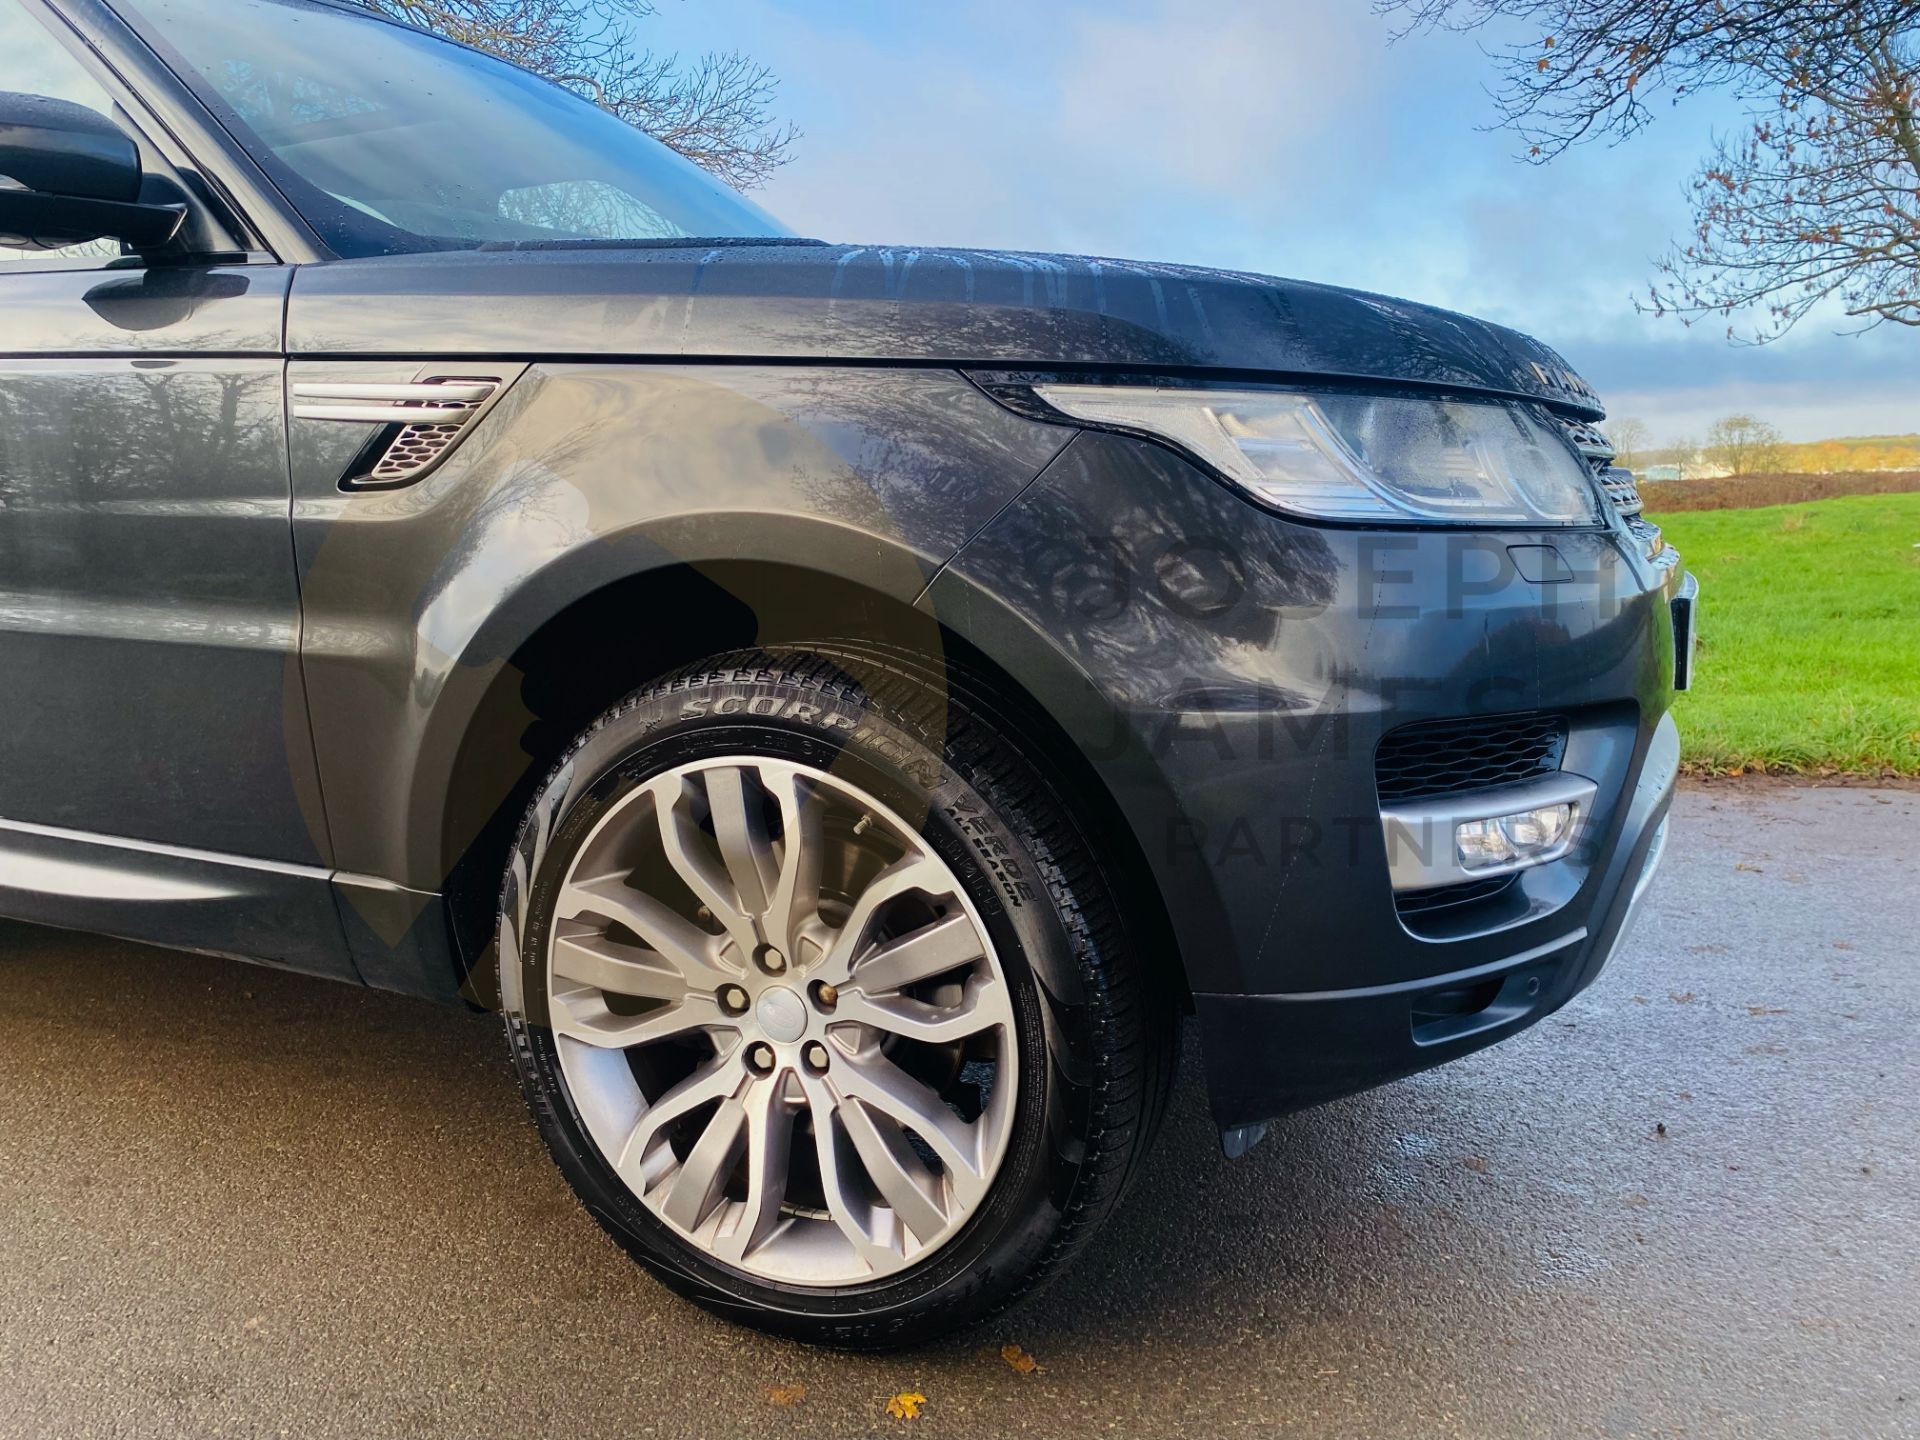 (ON SALE) RANGE ROVER SPORT "HSE" AUTO (NEW SHAPE) 17 REG - LEATHER - PANORAMIC ROOF - SAT NAV - - Image 12 of 47